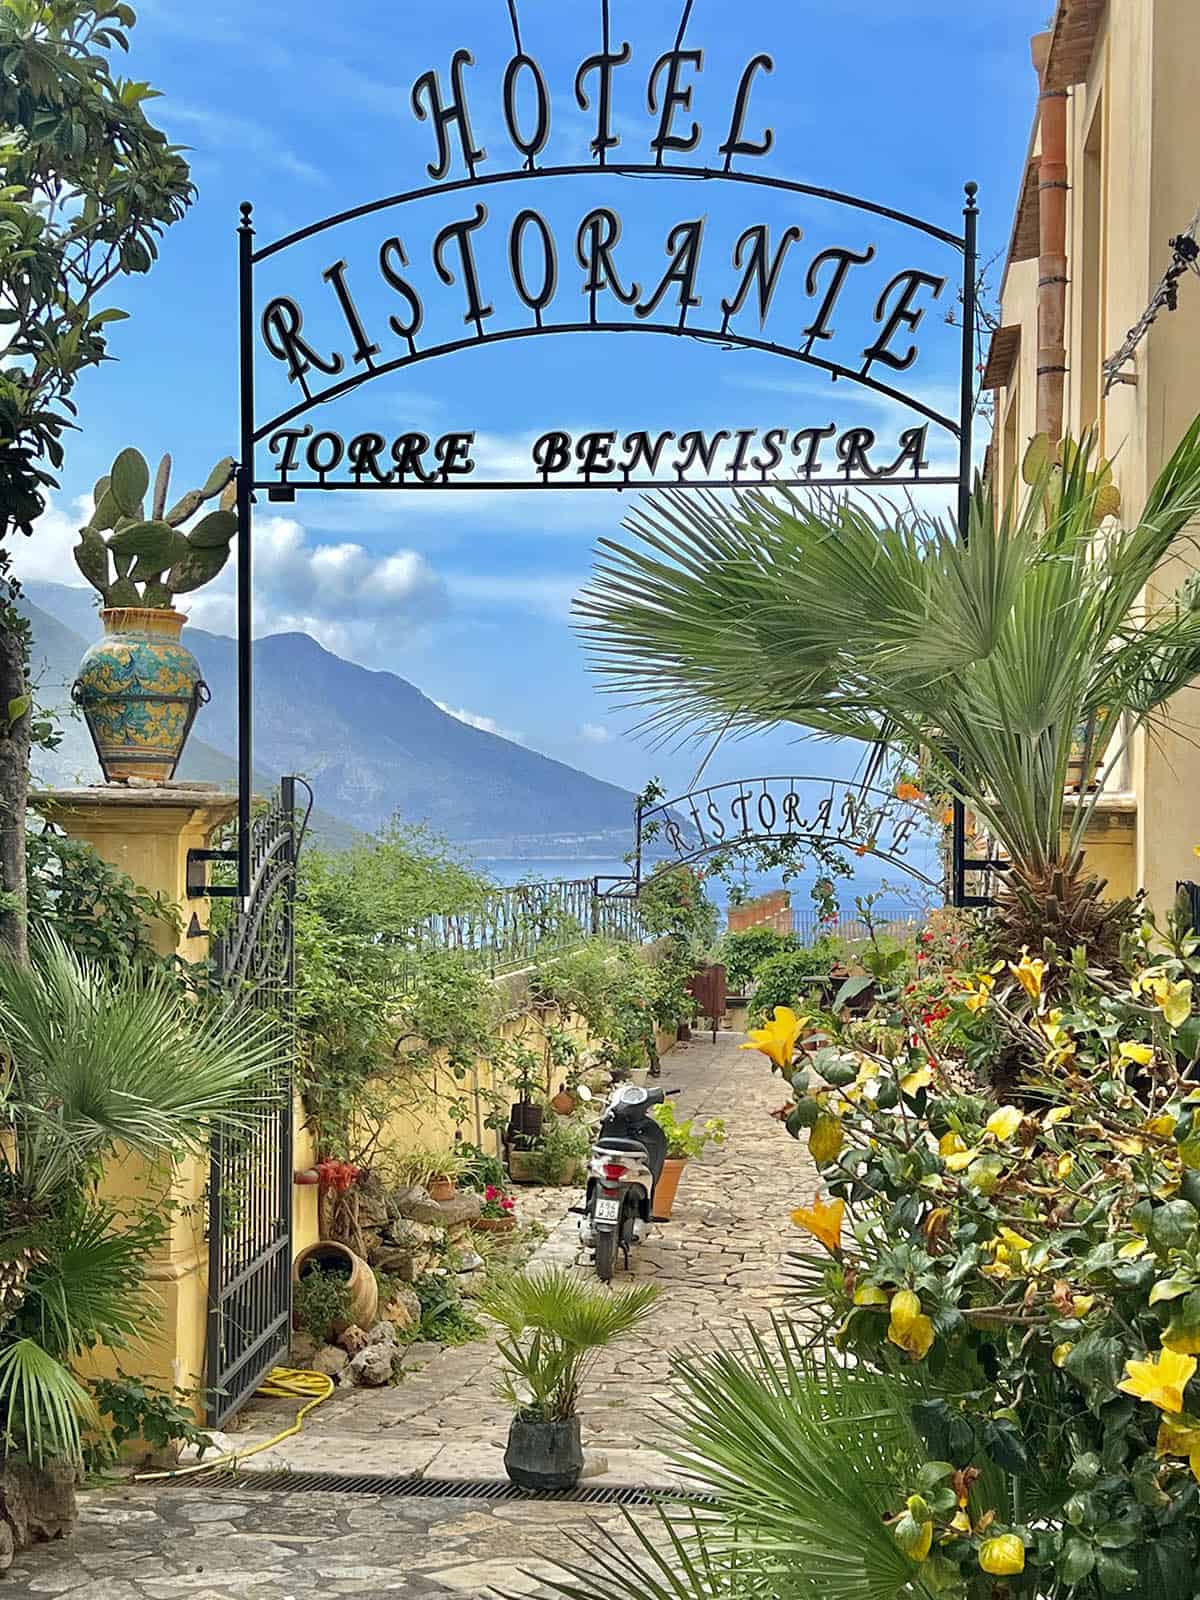 An image of Torre Bennistra Hotel in Scopello, Sicily